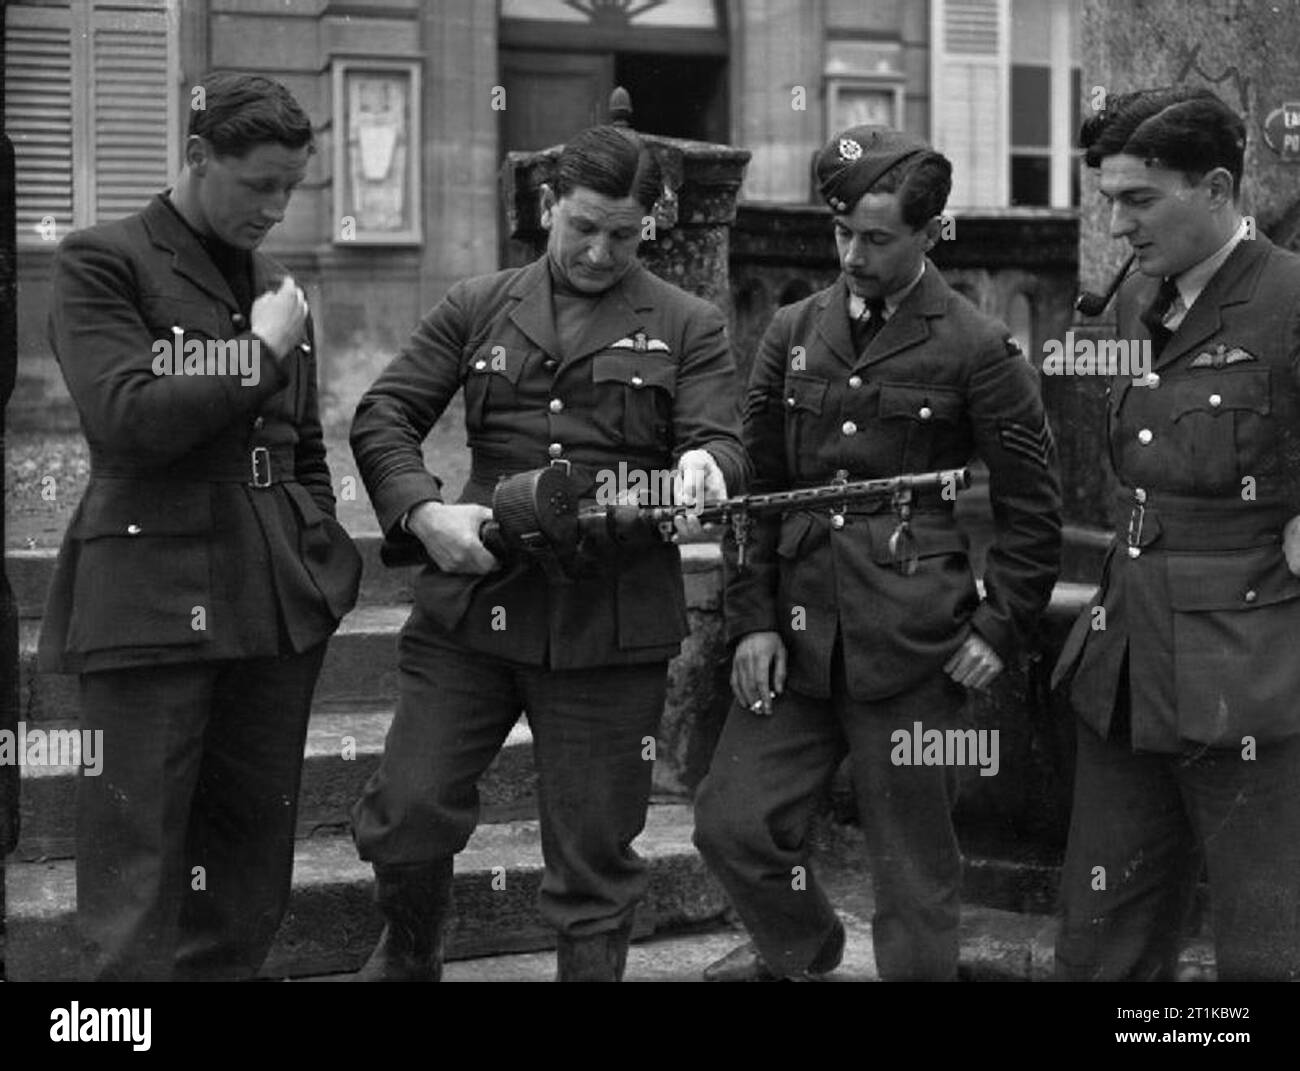 Royal Air Force- France, 1939-1940. Four pilots of No. 1 Squadron RAF study a German 7.9mm machine gun outside the Mairie at Neuville-sur-Ornain, which served as the Officers' Mess while the Squadron was based at Vassincourt: (left to right) Flying Officer P H M Richey Squadron Leader P J H 'Bull' Halahan (Officer Commanding No. 1 Squadron) Sergeant A V 'Darkie' Clowes Flight Lieutenant P R Walker Richey, Clowes and Walker were credited with victories in the Squadron's first aerial combats of the war with enemy fighters, on 29 March 1940 Stock Photo